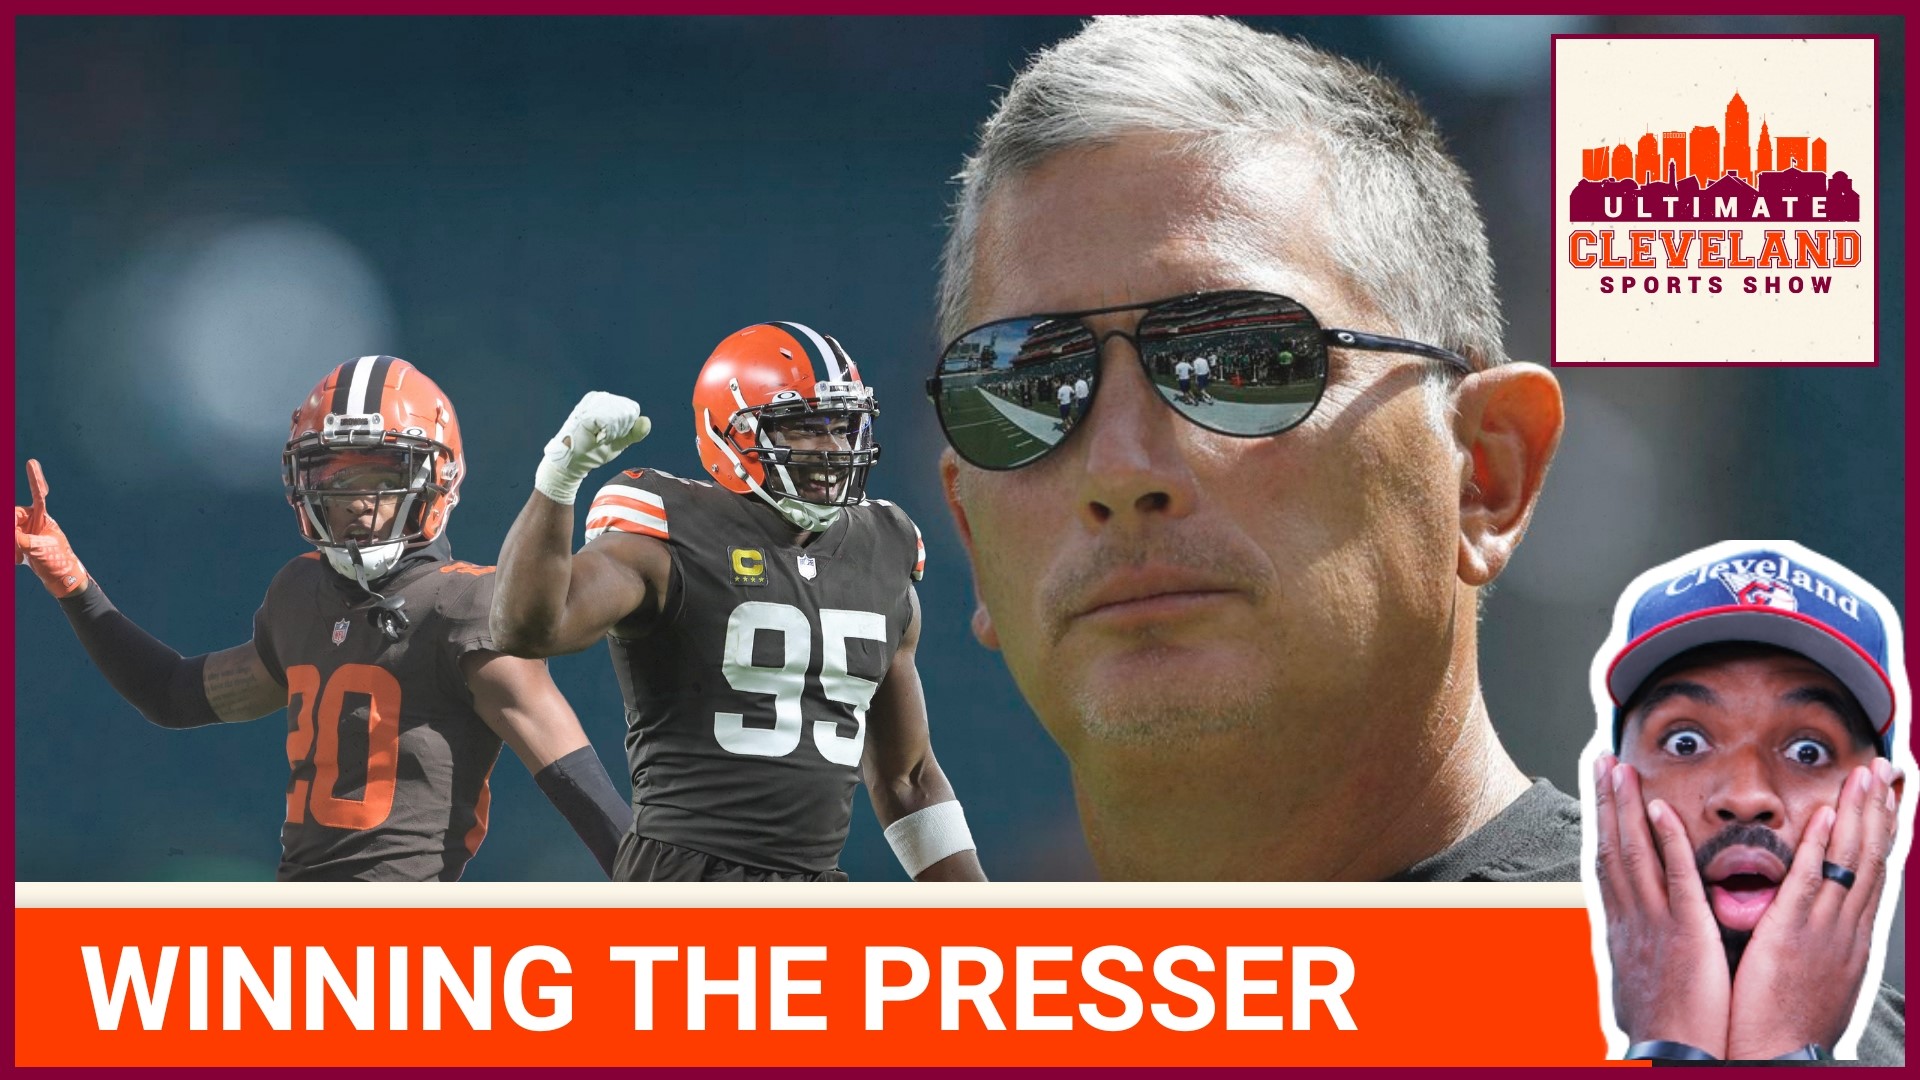 Press conferences don't win games but you can't do it much better than Jim Schwartz did with the Browns.